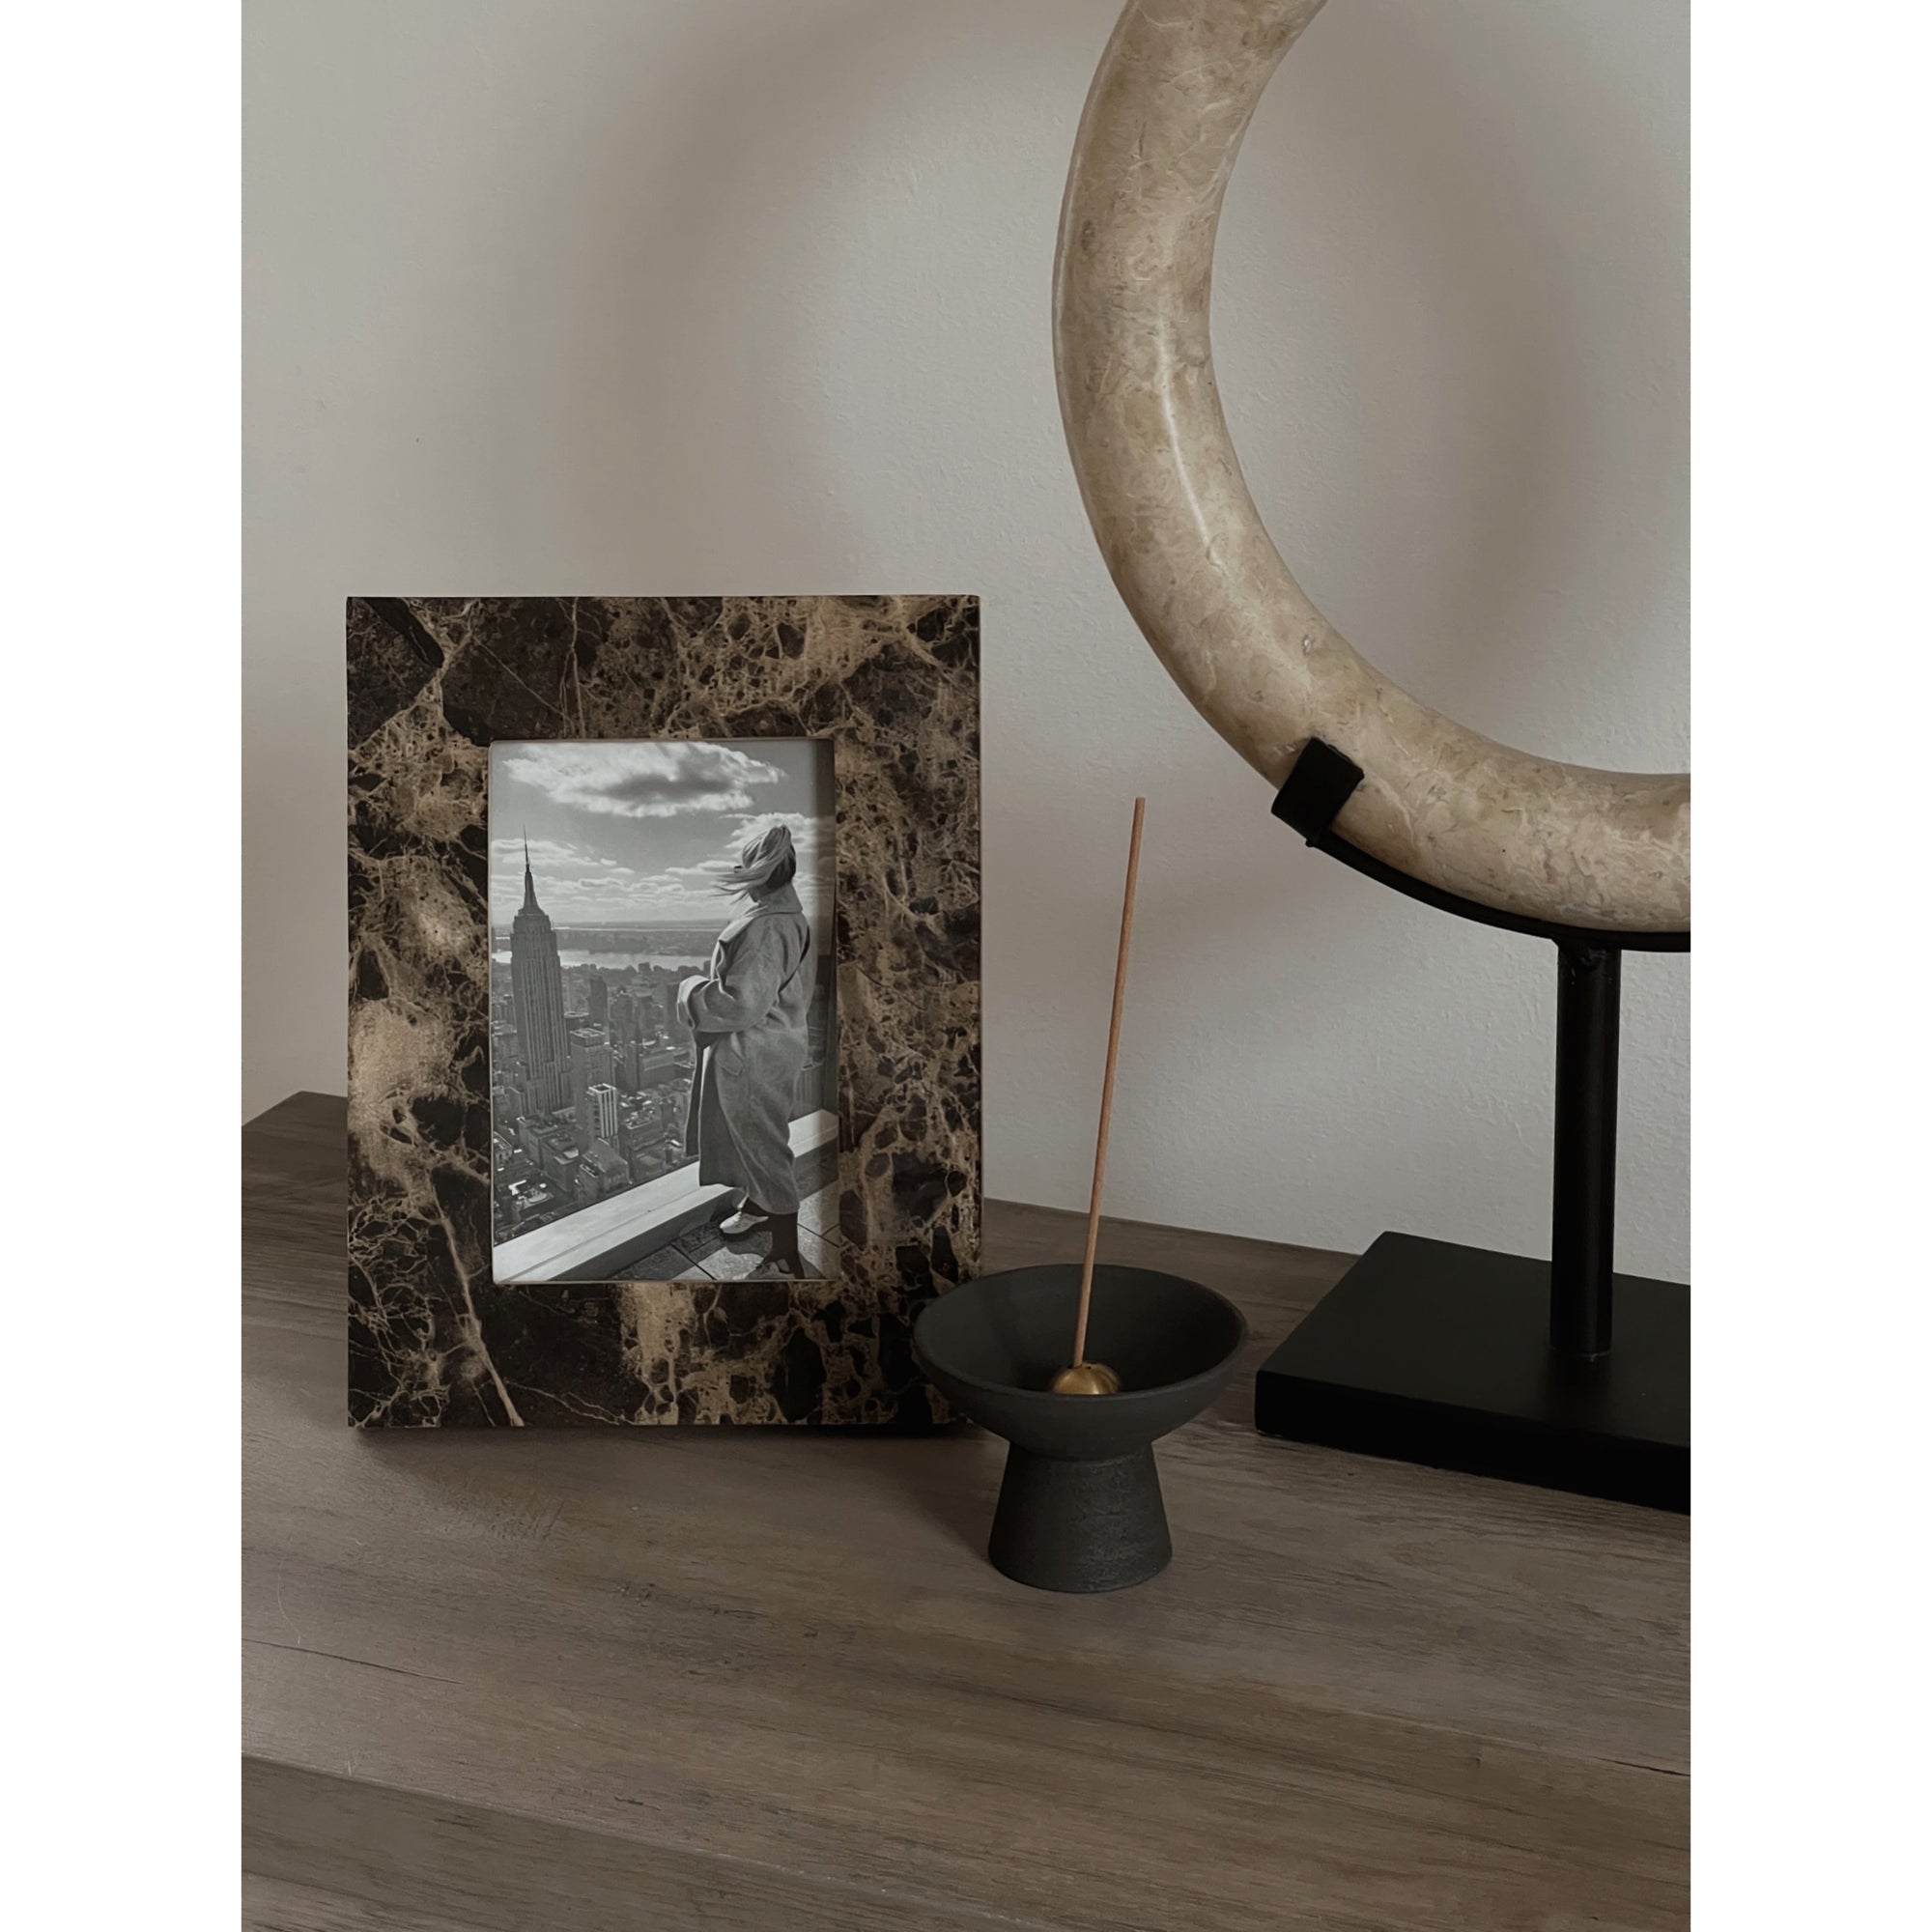 Forest Marble Effect Photo Frame | 4" x 6"